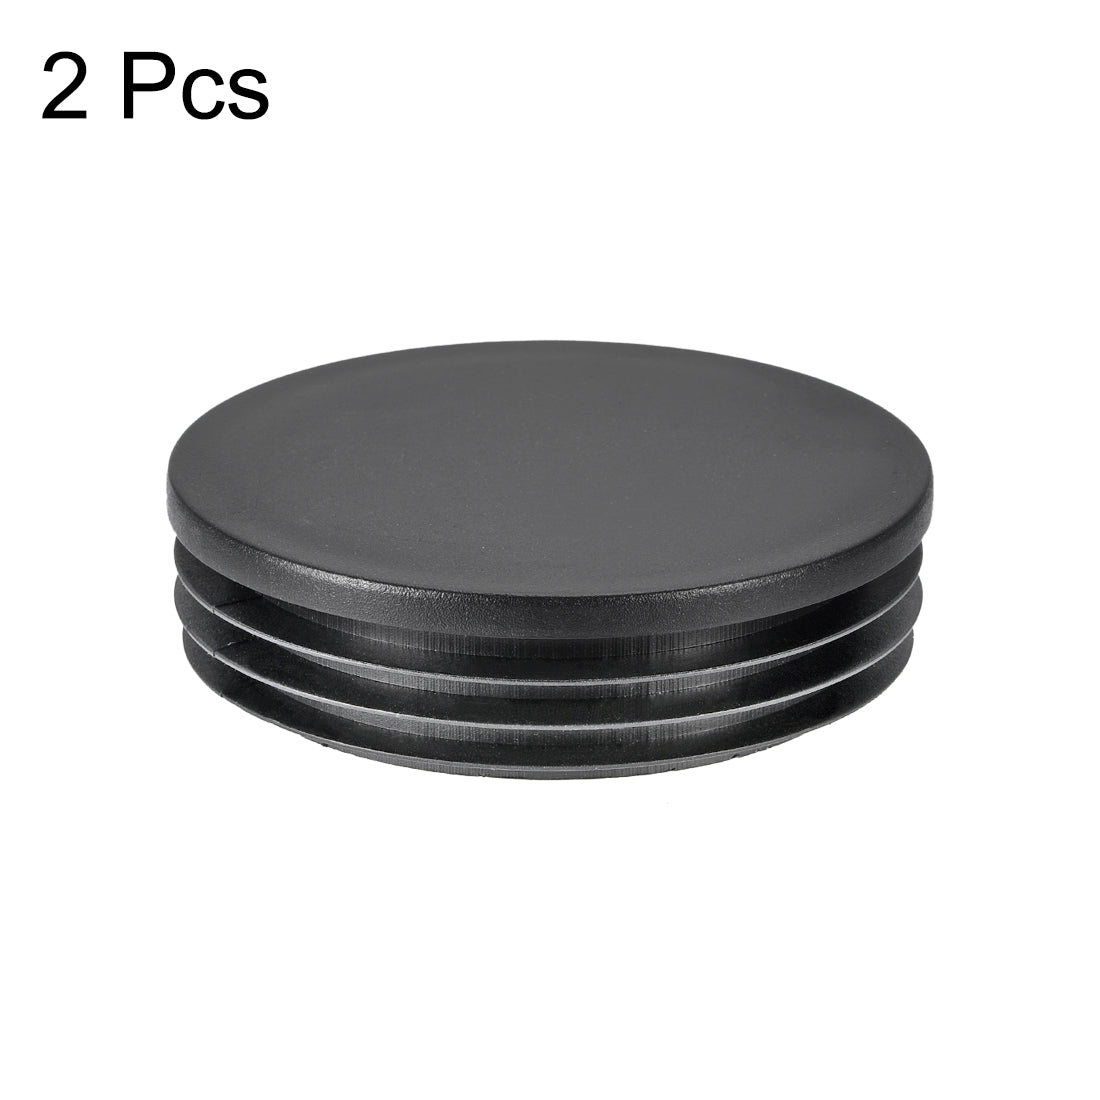 uxcell Uxcell 2pcs 90mm Dia Plastic Tubing Plug Round Post End Caps for Handrail Stair Newel Guardrail Tube Black